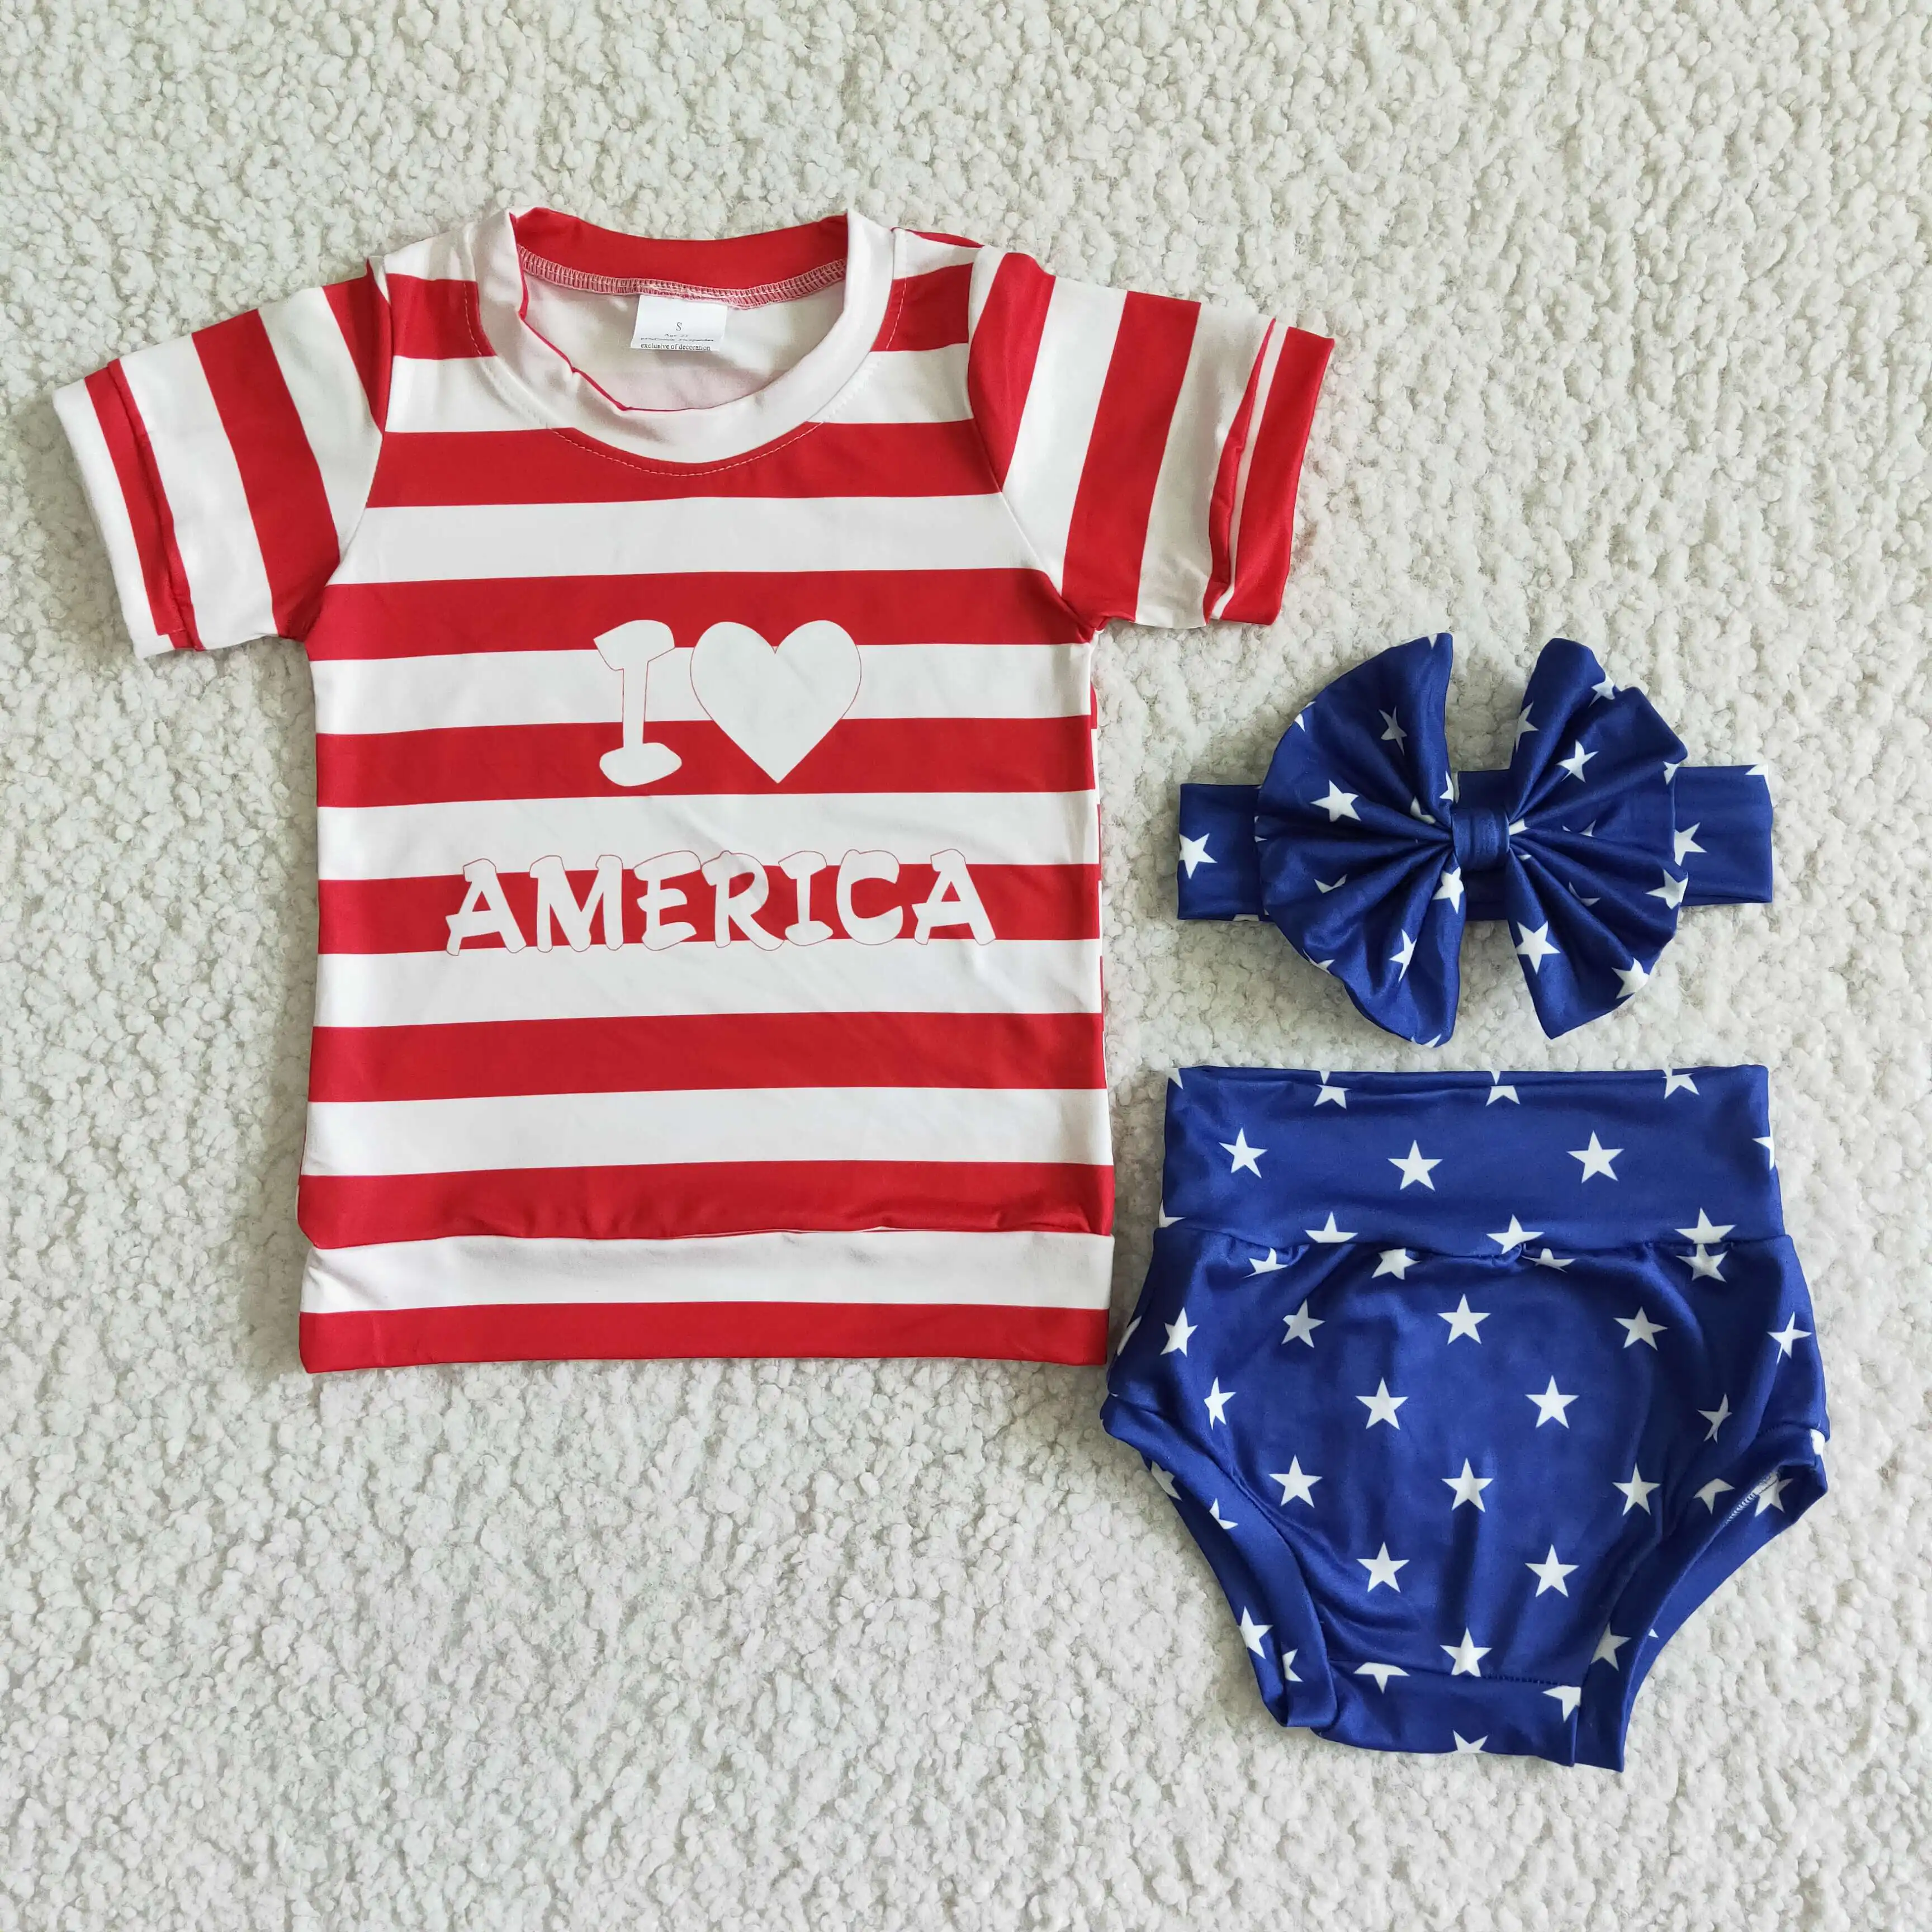 Quality Products Children Clothing Summer Children Sets Baby Clothes Baby Toddler 3pcs Kids Outfits Headband